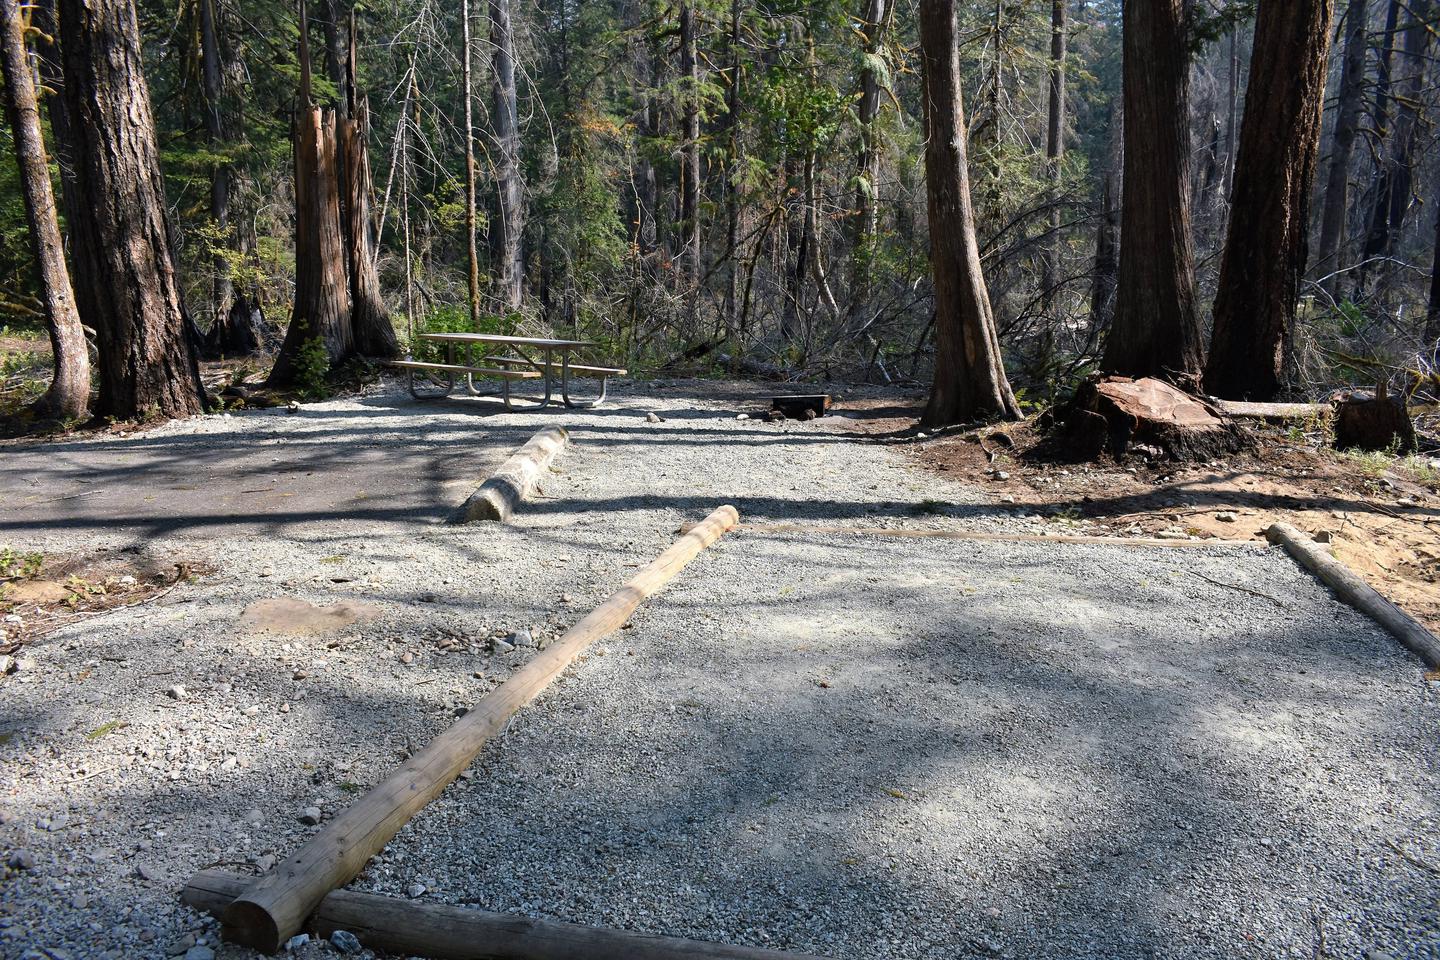 Picnic table, fire ring, and tent padView of campsite